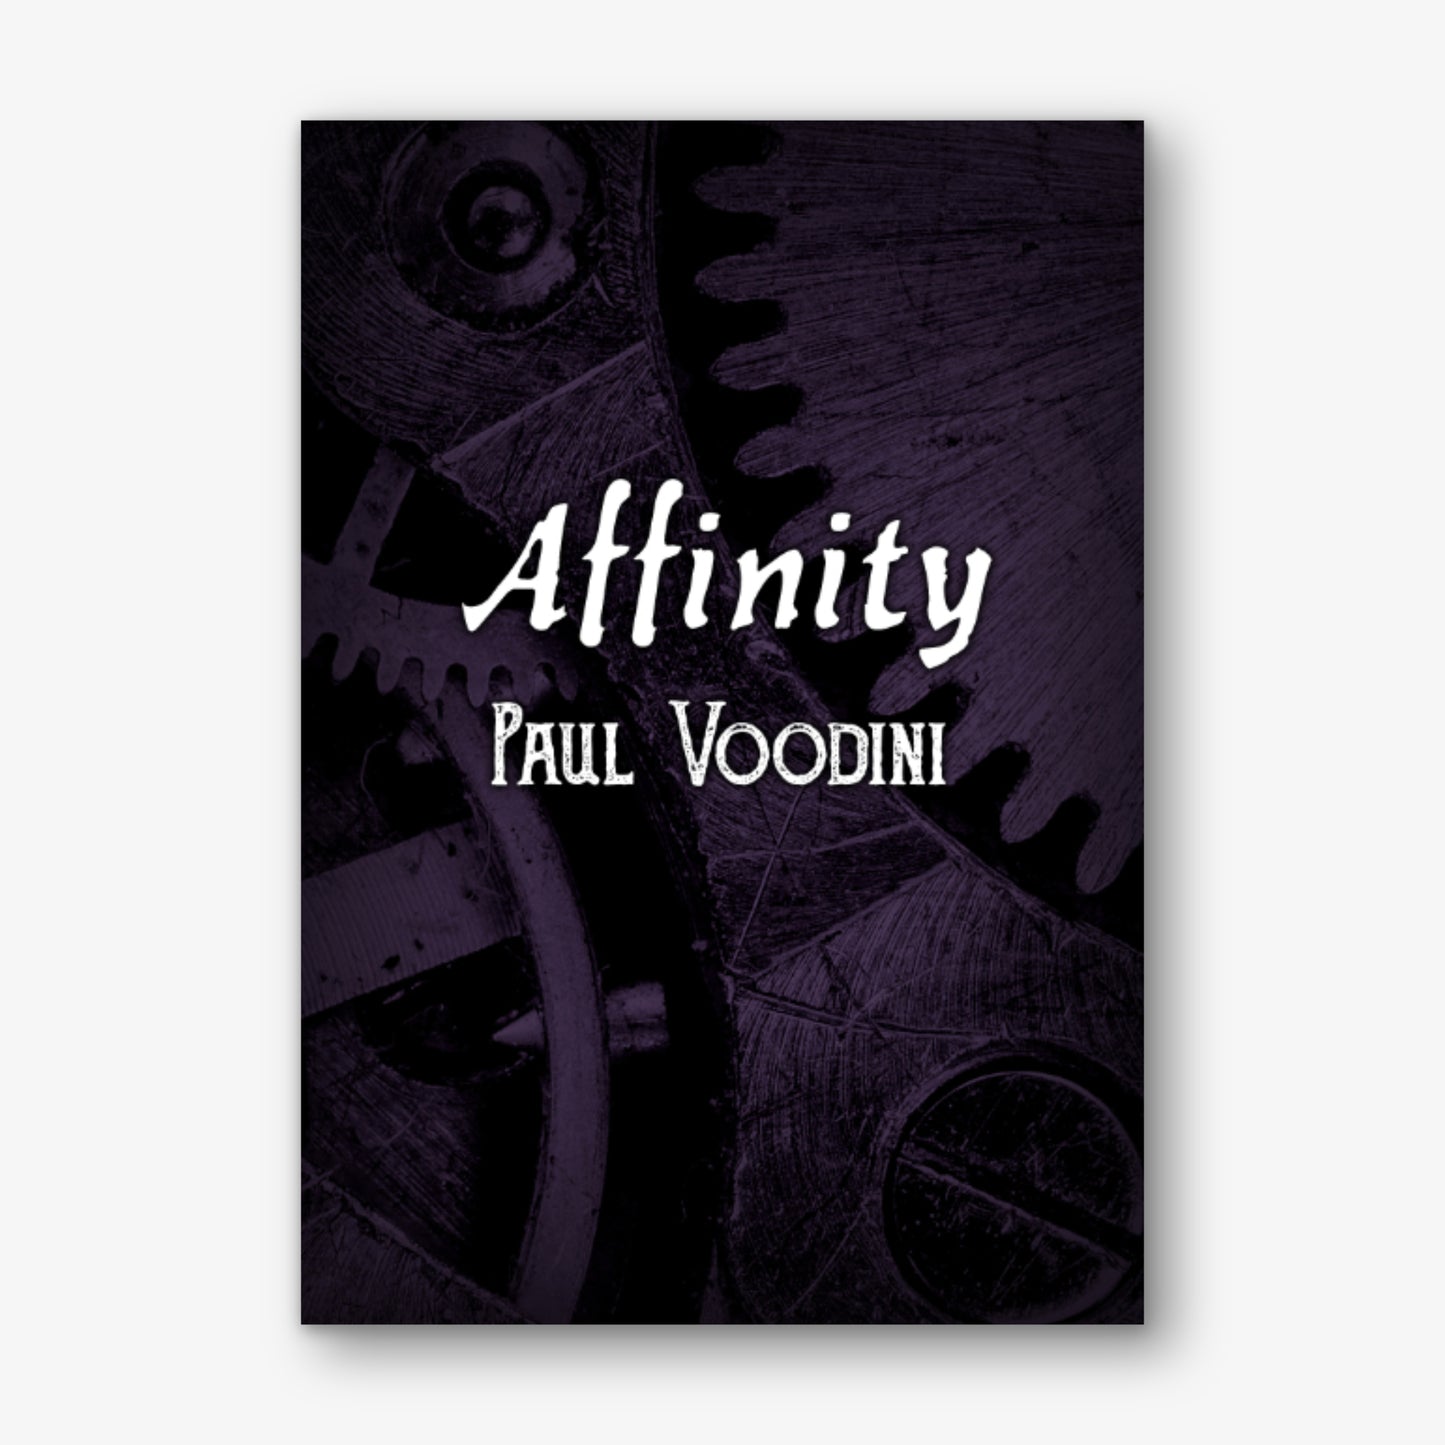 Affinity by Paul Voodini